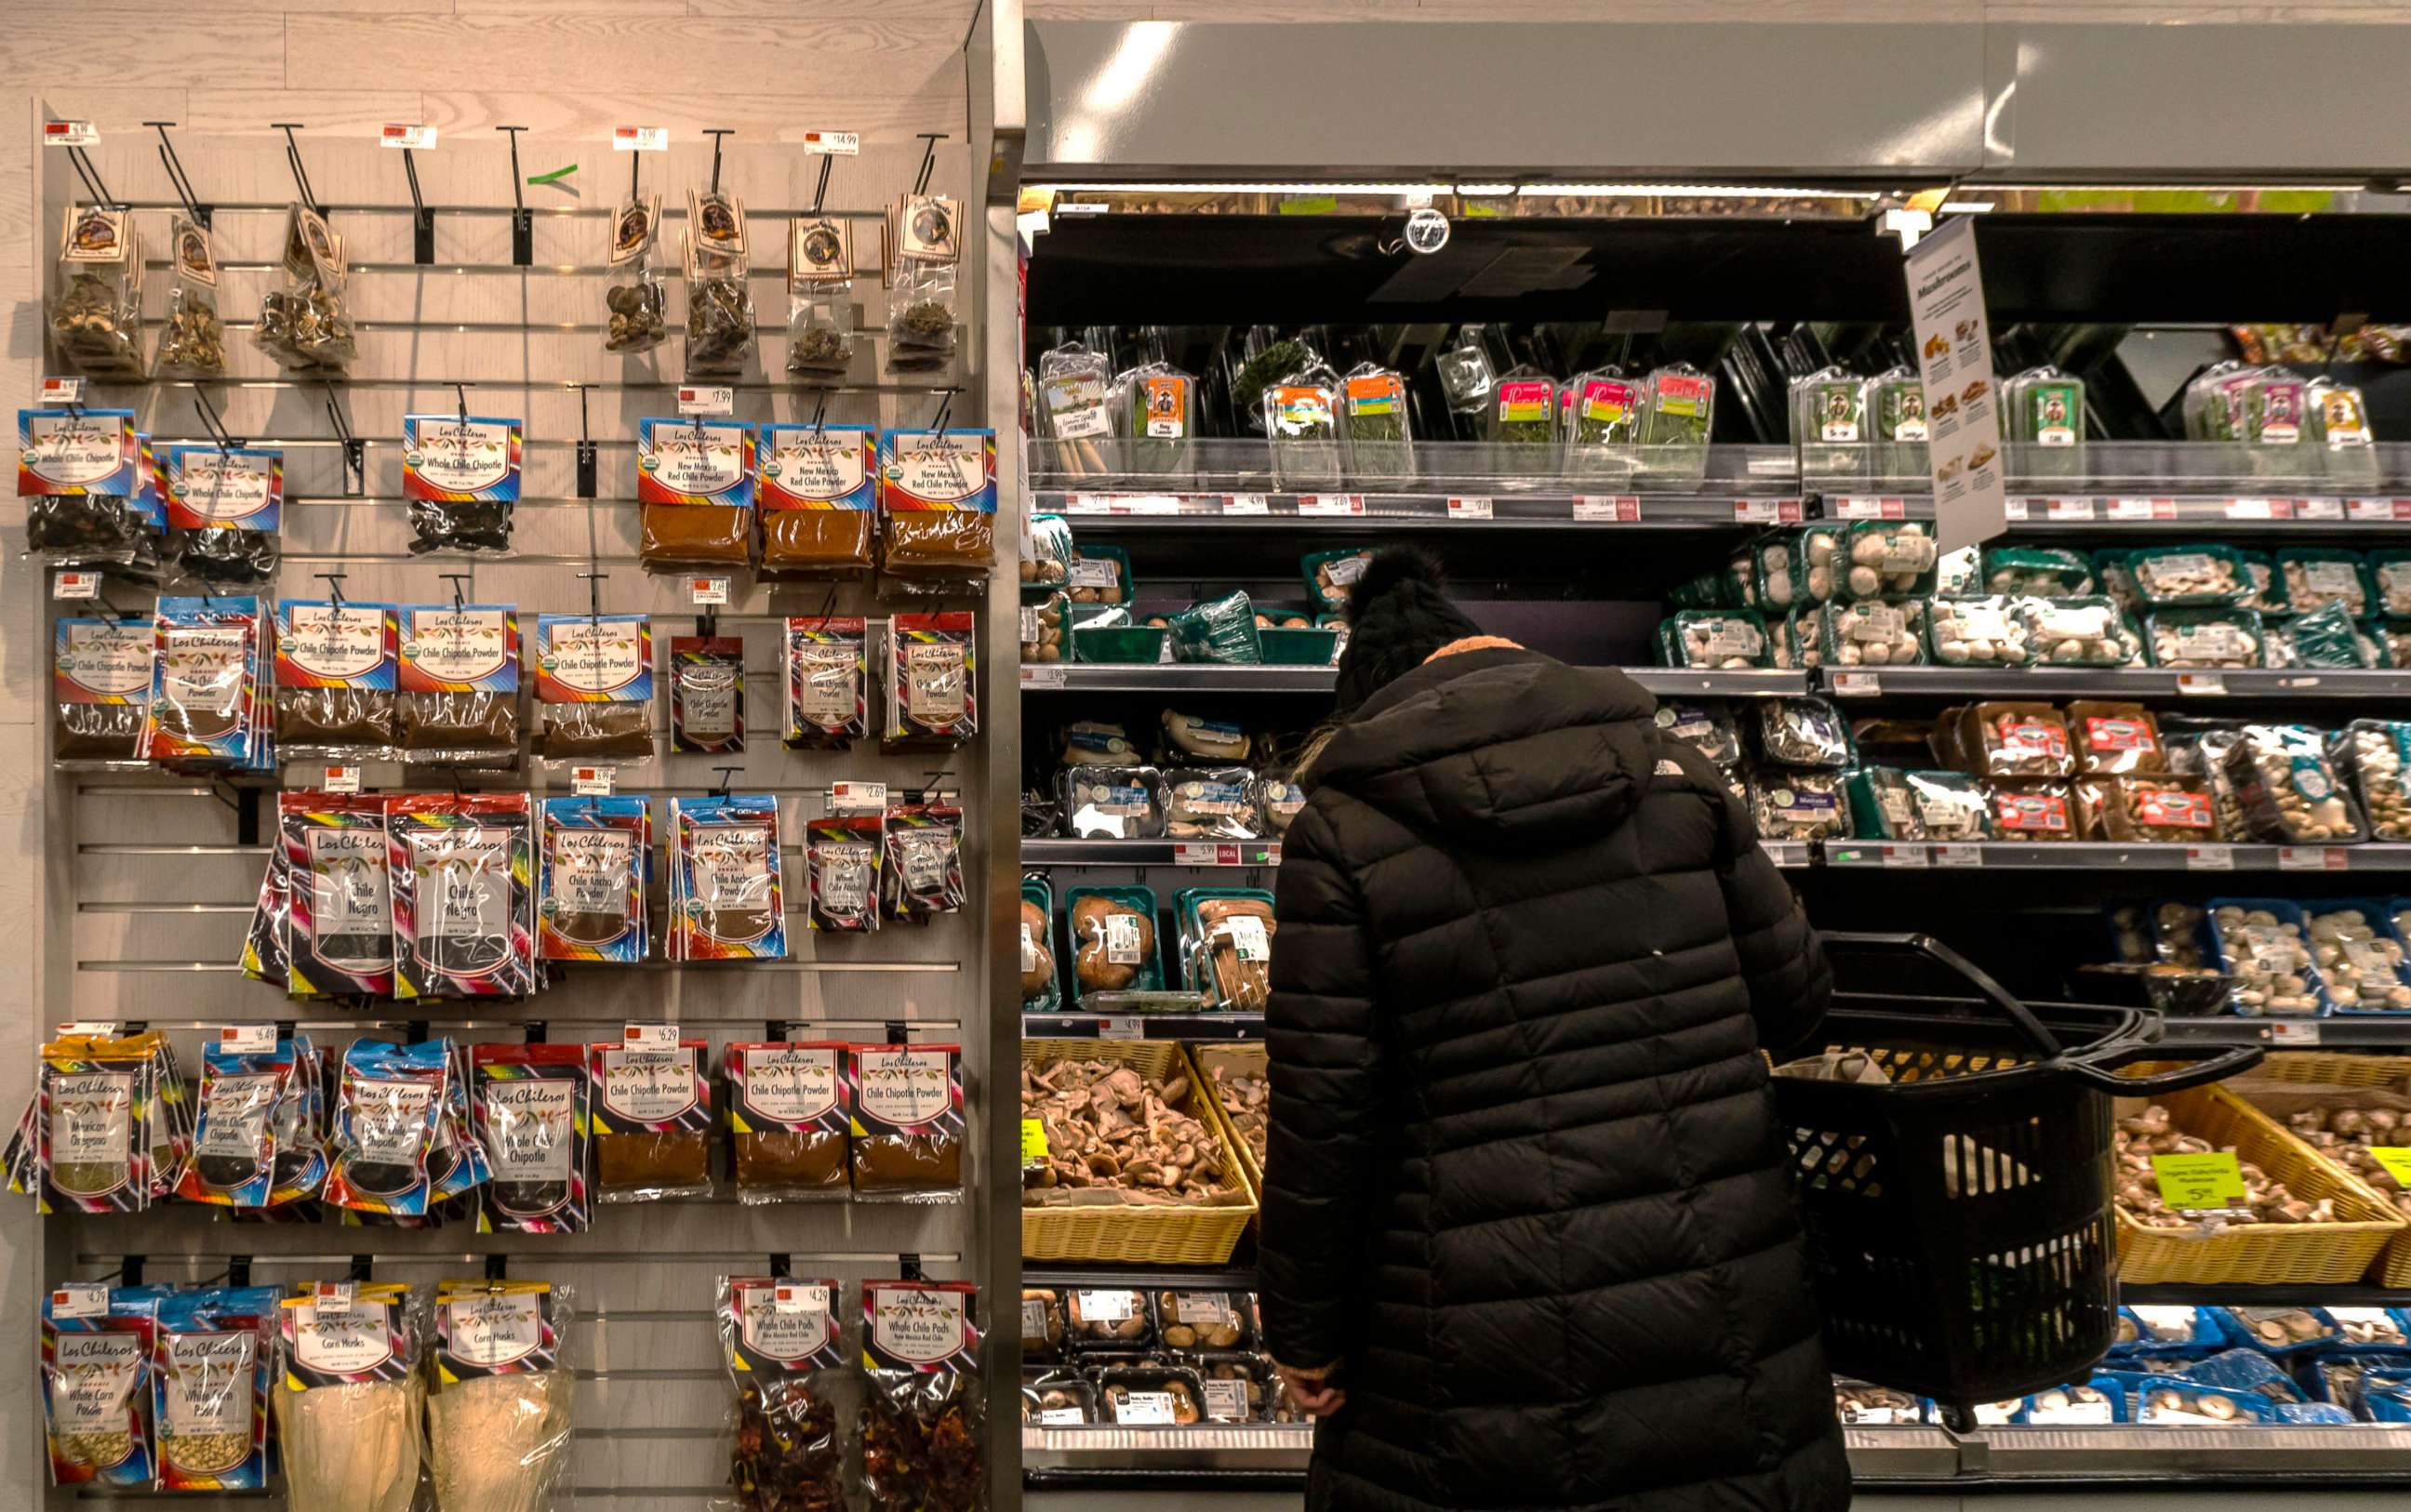 PHOTO: A shopper looks for produce in a Whole Foods Market supermarket in New York on Jan. 9, 2022.